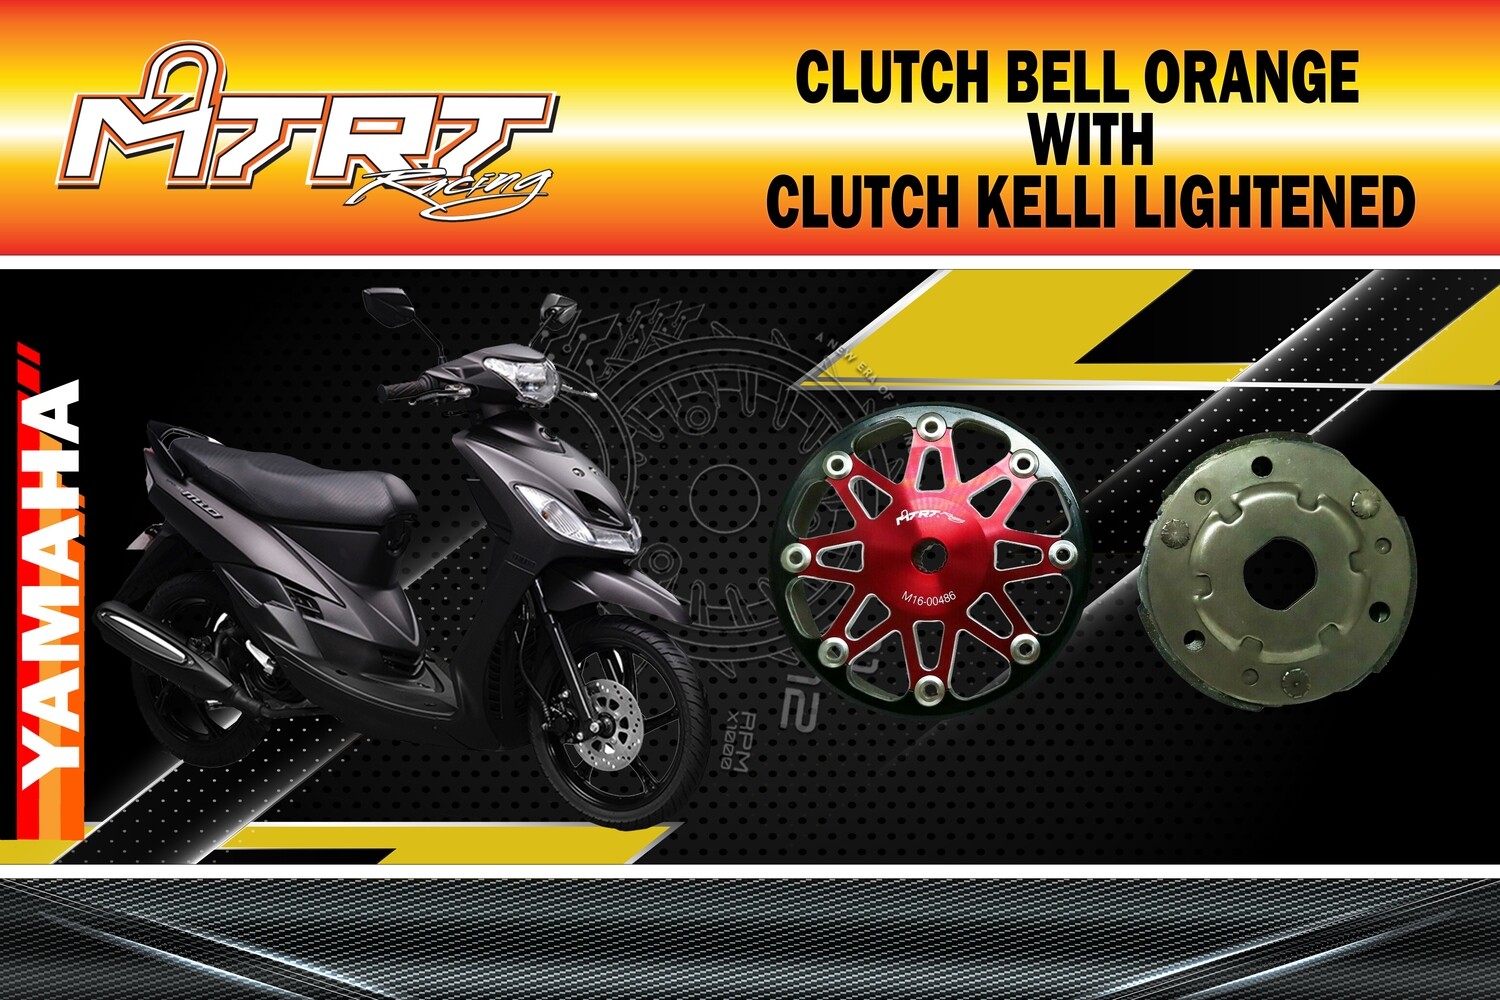 CLUTCH BELL MIO RED MTRT with CLUTCH KELLI LIGHTENED